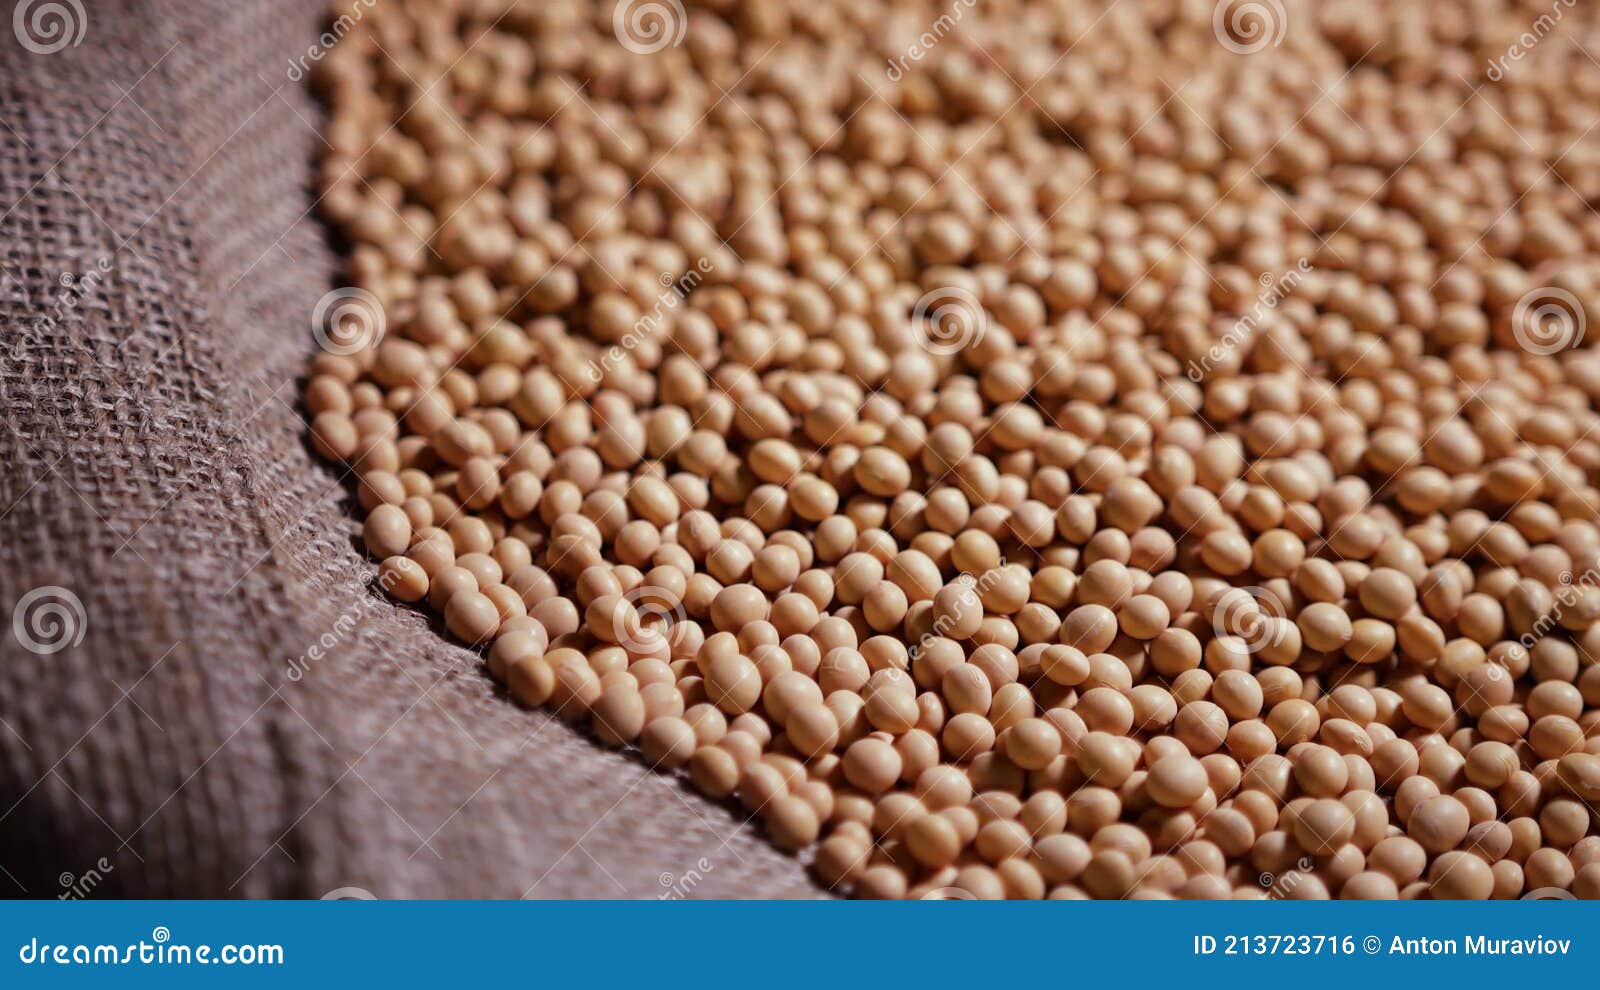 Premium Photo | Dried soybeans scattered from burlap bag on to black wooden  table